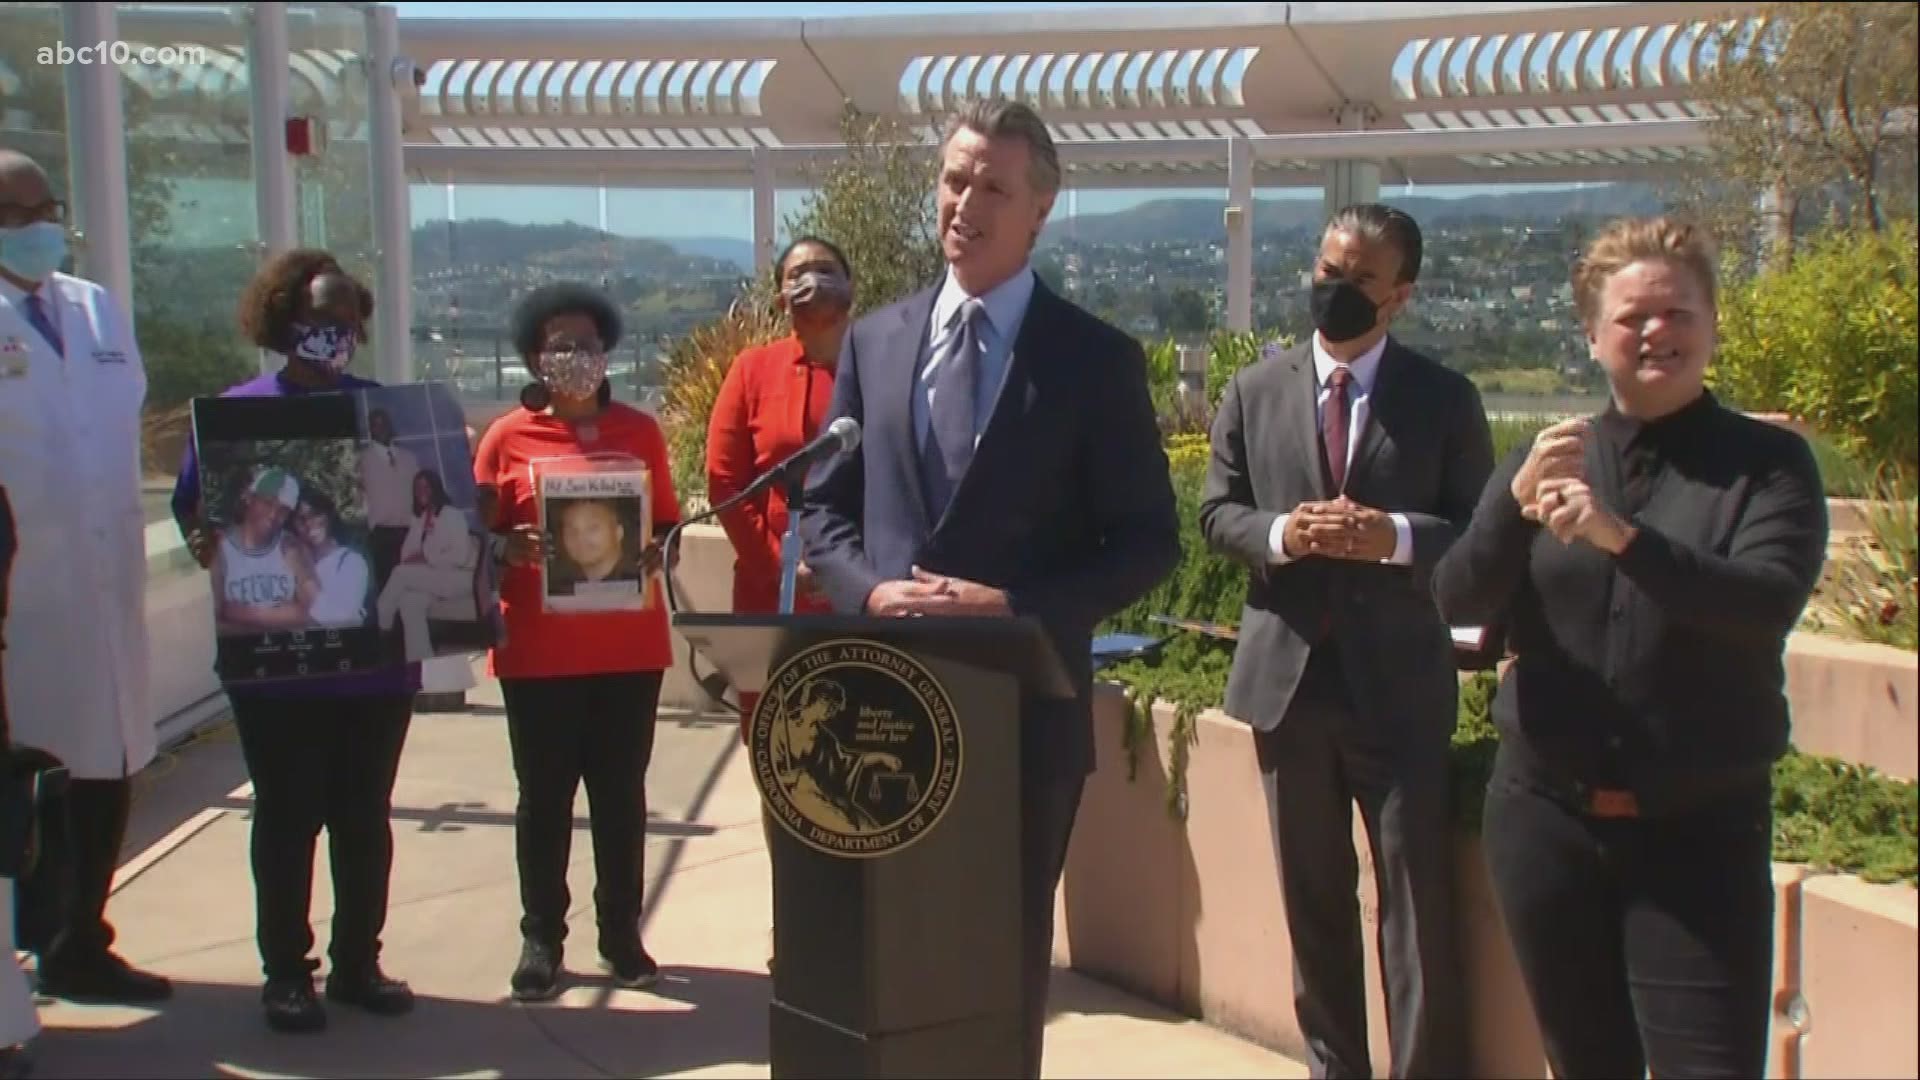 Gov. Newsom and Attorney General Bonta announced the state's decision to appeal a recent decision that declared California's assault weapons laws unconstitutional.